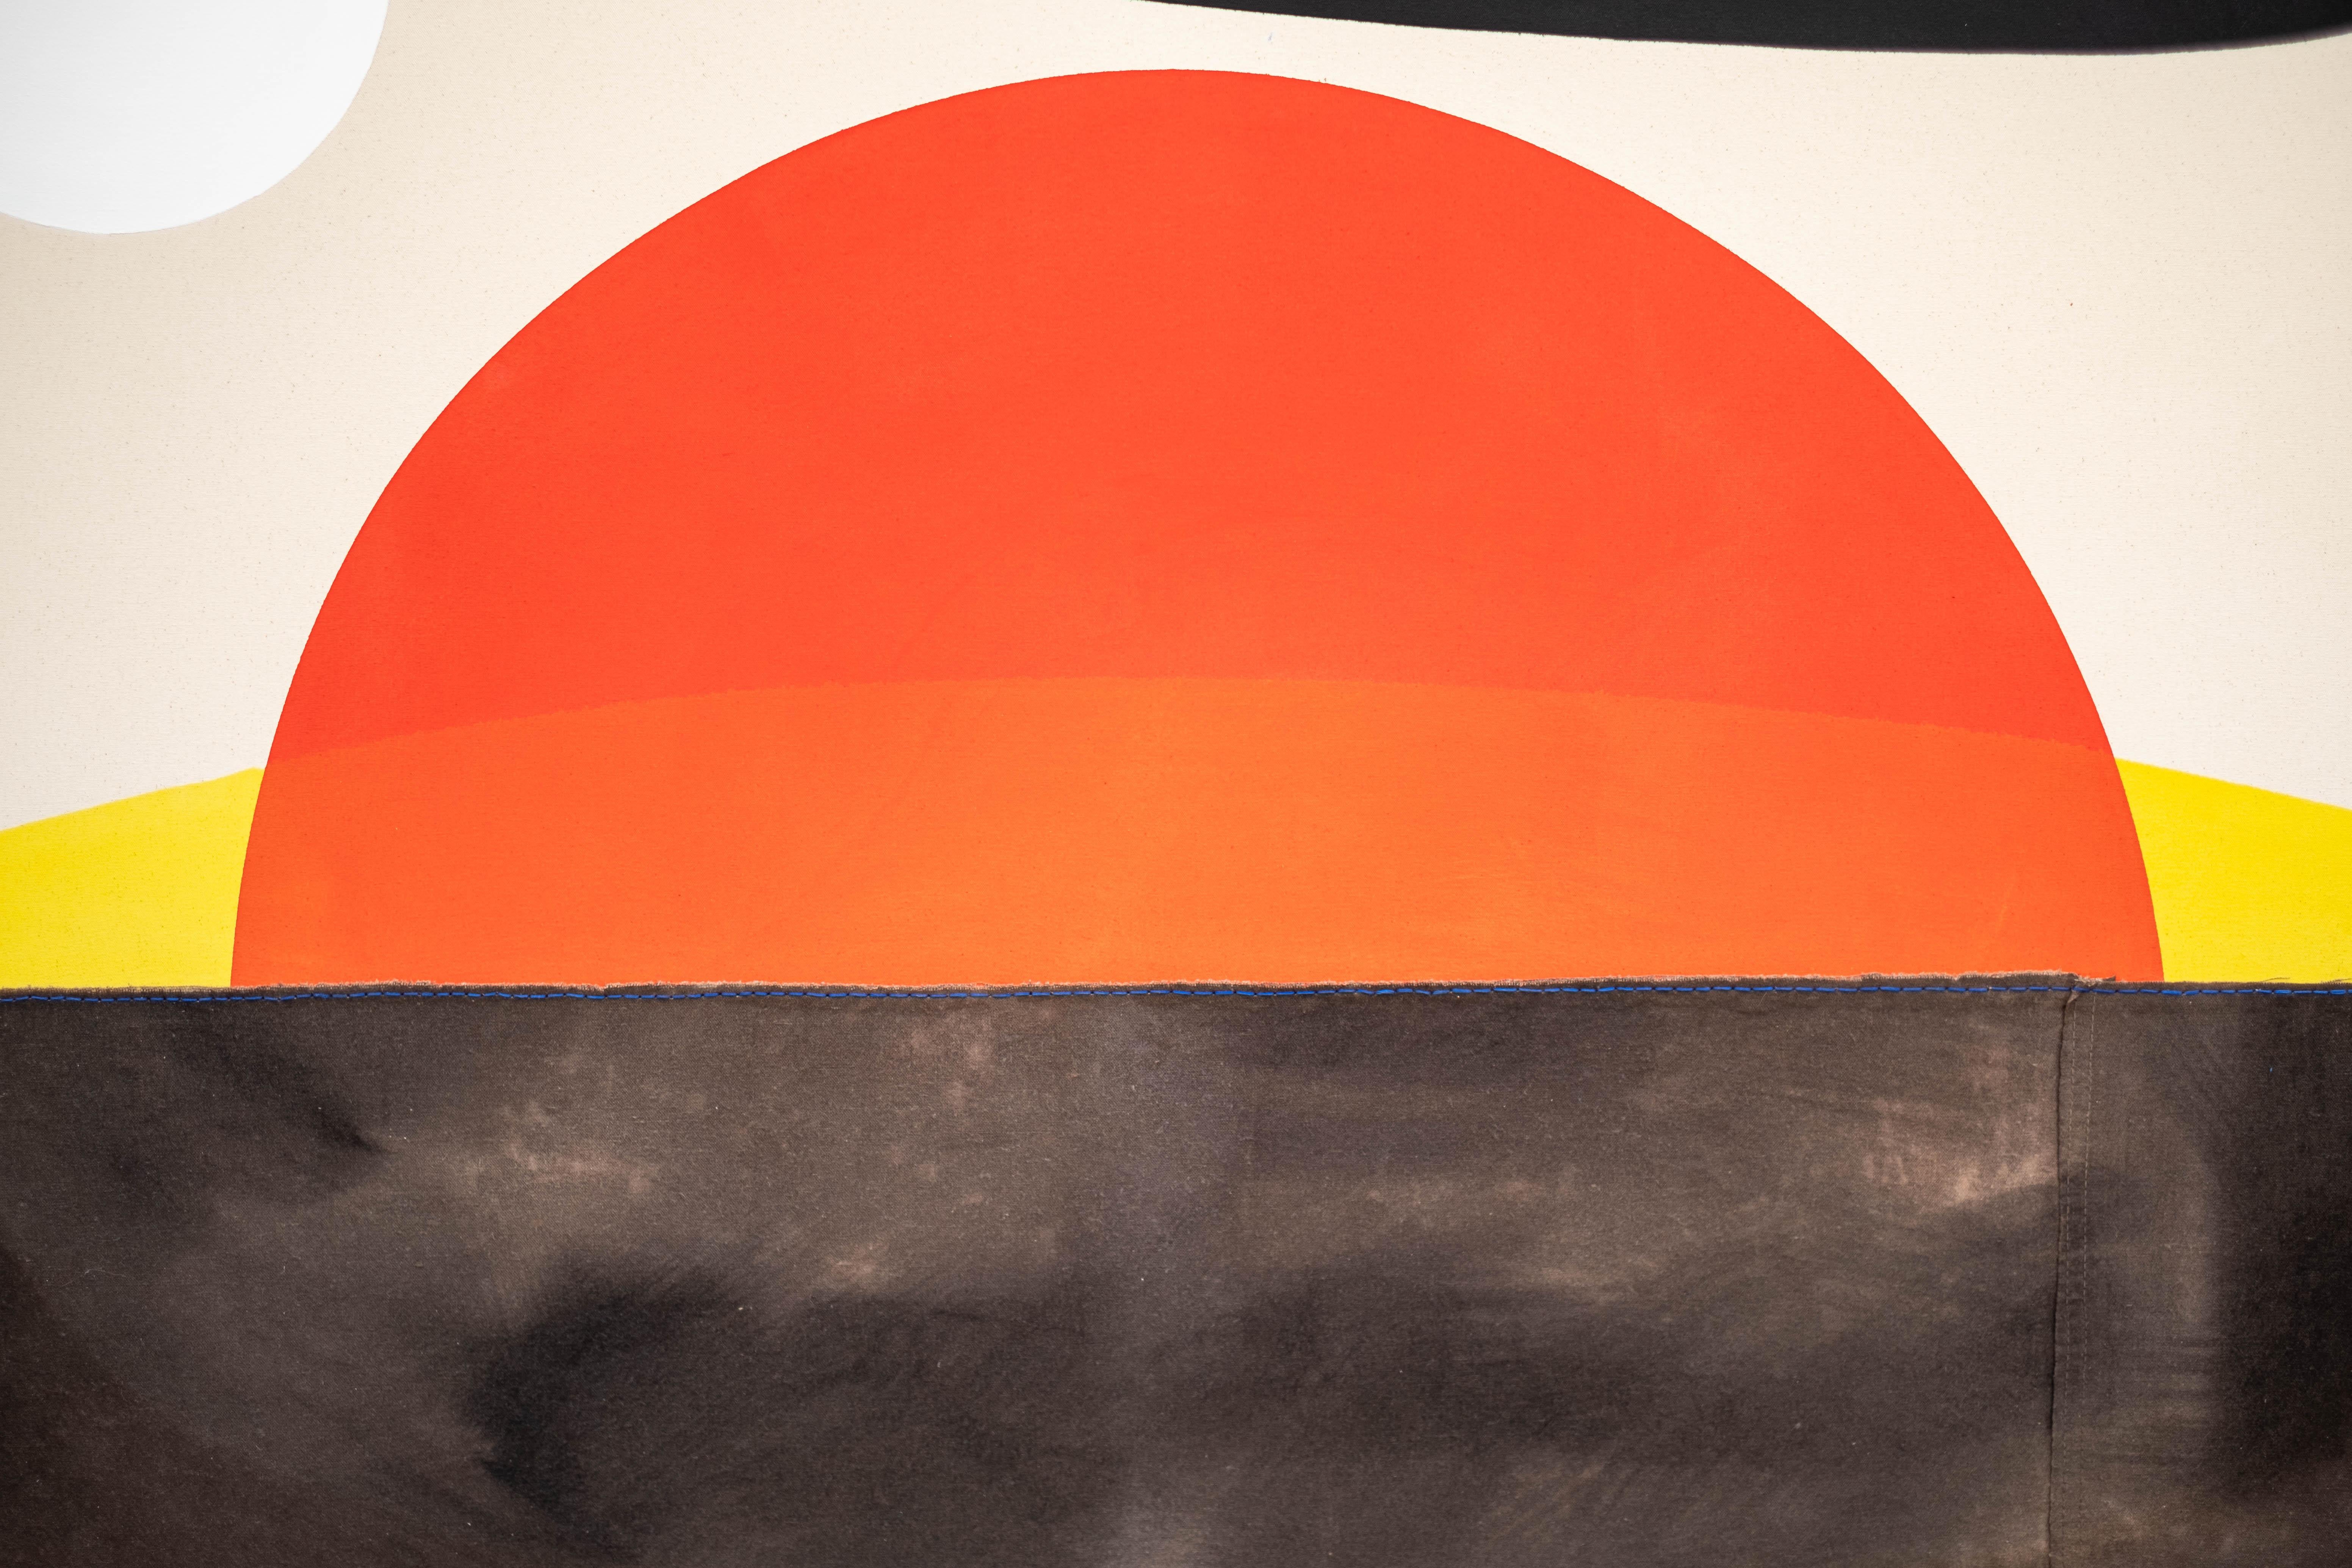 Blood red sun with moon over 4 rocks - abstract, landscape, acrylic on canvas For Sale 4